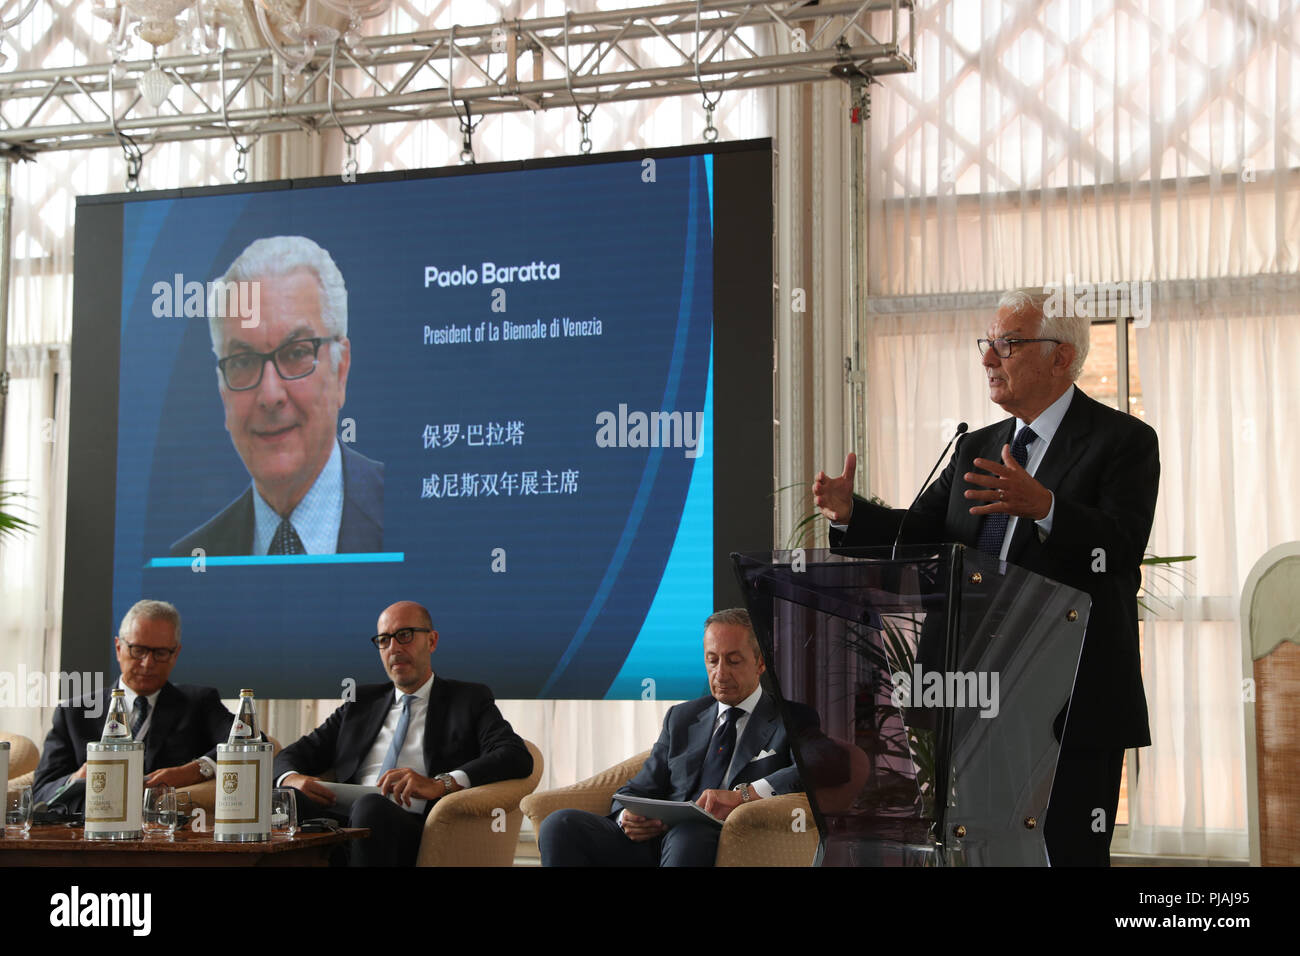 (180906) -- VENICE, Sept. 6, 2018 (Xinhua) -- Paolo Baratta, president of La Biennale di Venezia, addresses the Sino-Italian Co-Production Forum in Venice, Italy, Sept. 1, 2018. Italian filmmakers and producers should join forces with China, where audiences are growing and the market is booming, film industry professionals said at the Sino-Italian Co-Production Forum held on Saturday at the Venice Film Festival. (Xinhua/Cheng Tingting) (wtc) Stock Photo